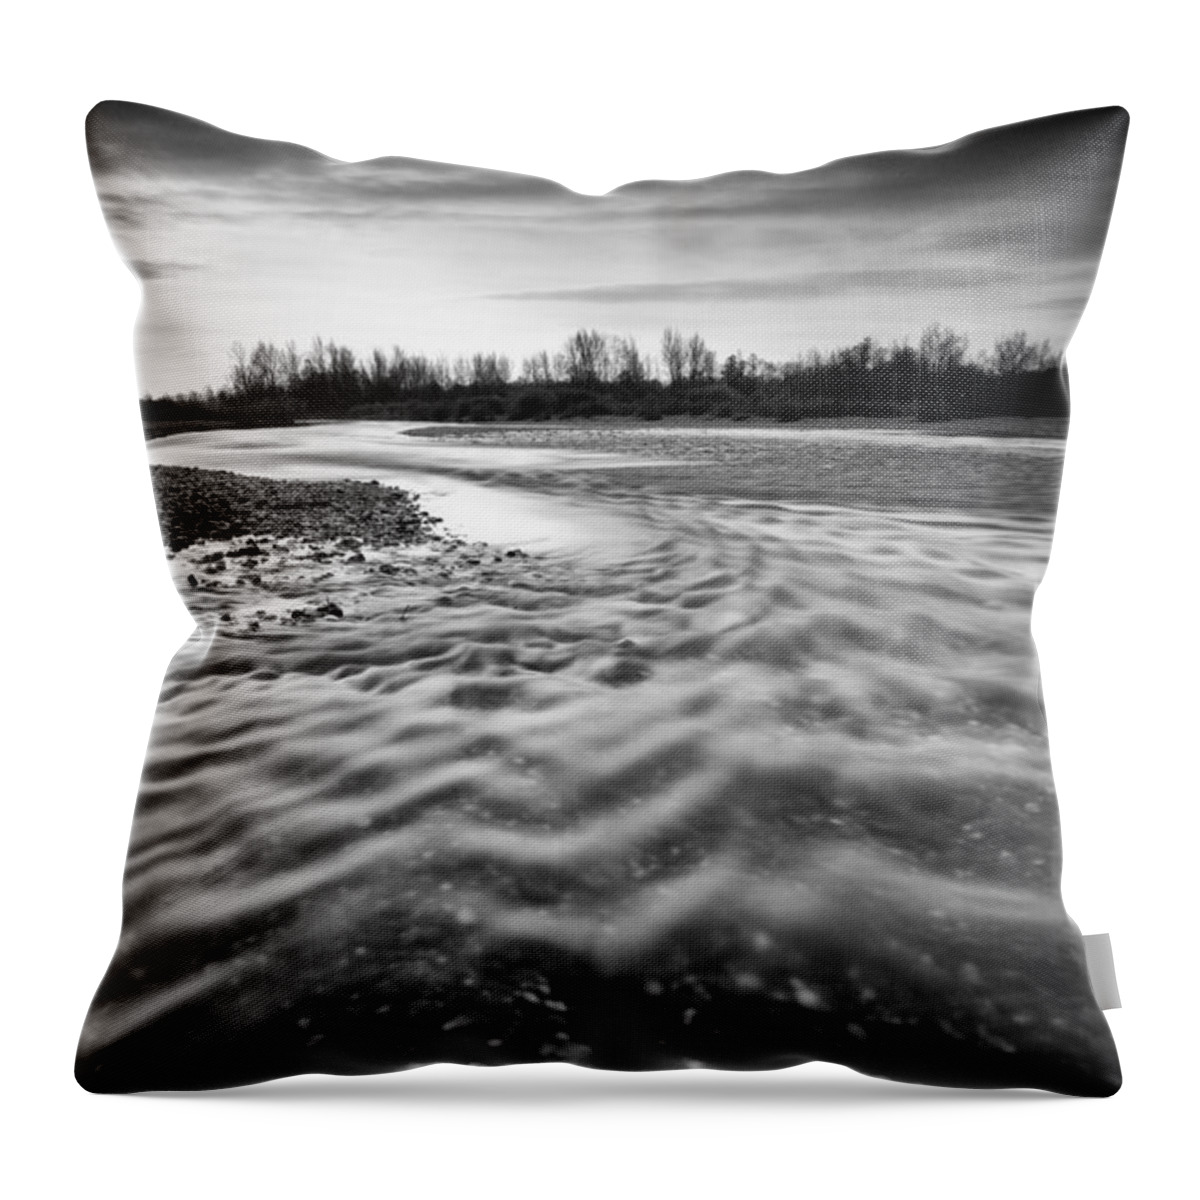 Landscapes Throw Pillow featuring the photograph Restless river III by Davorin Mance